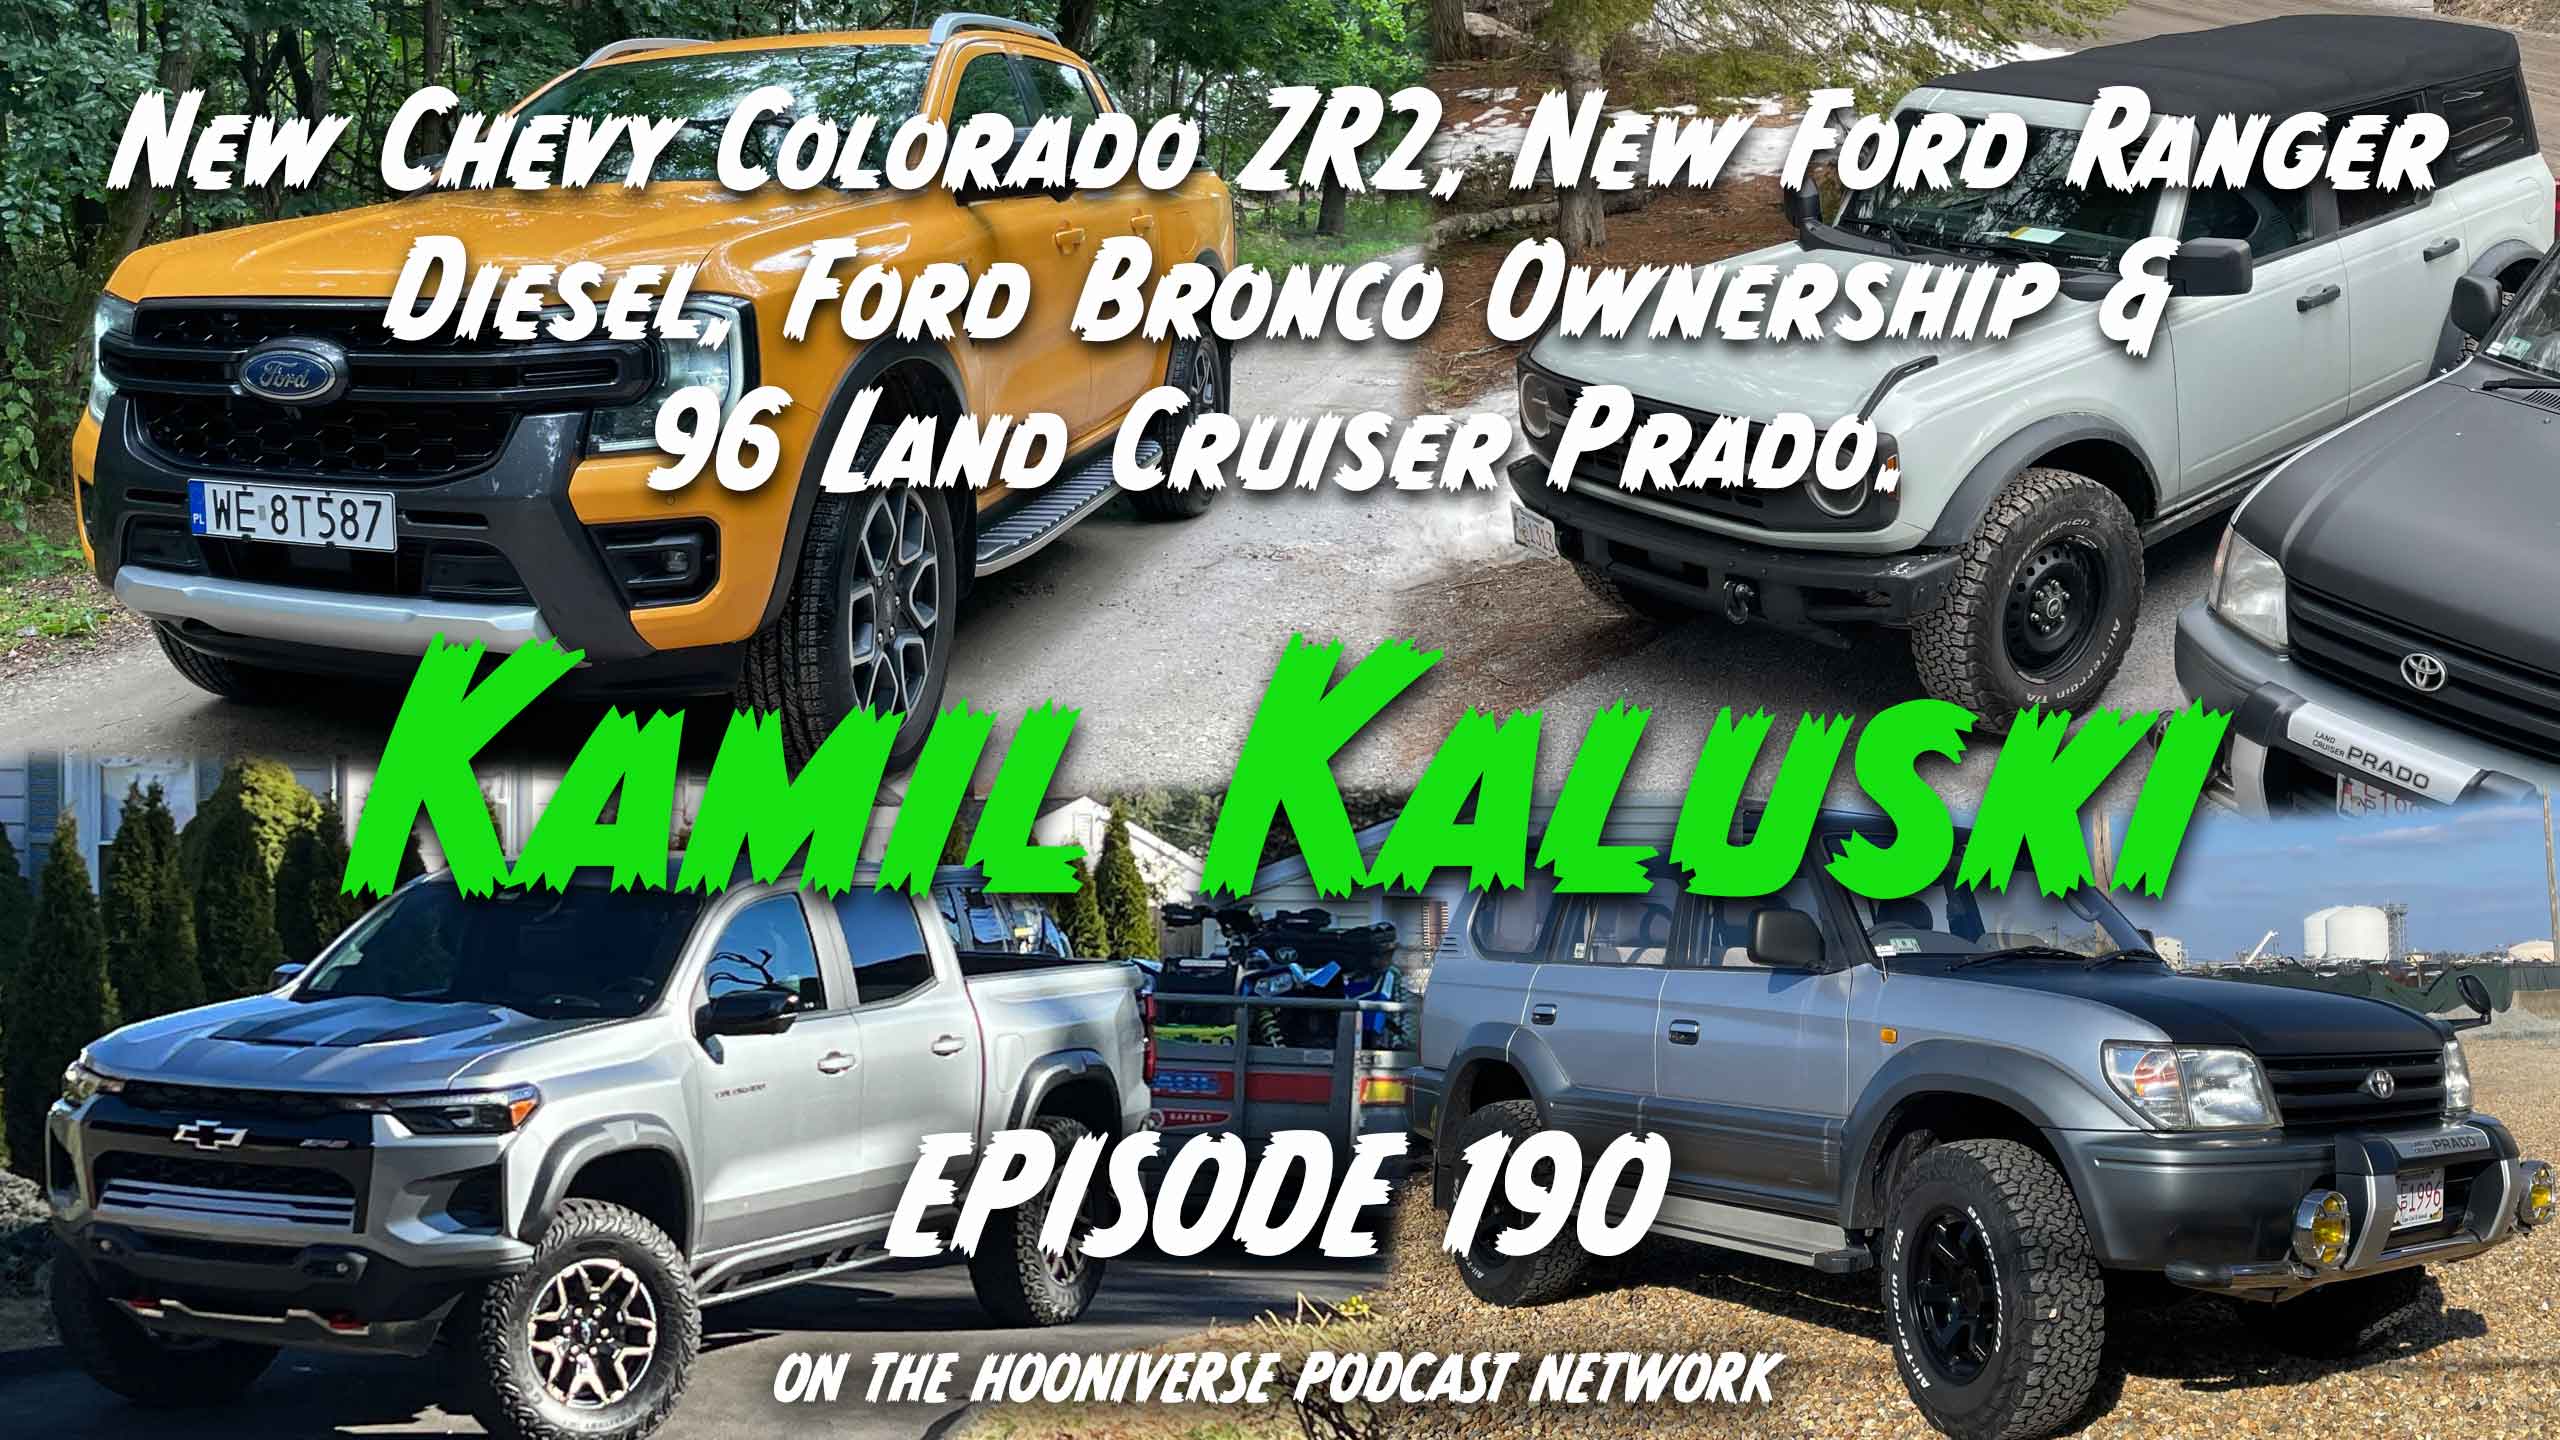 Kamil-Kaluski-Colorado-ZR2-New-Ford-Ranger-Off-The-Road-Again-Podcast-Episode-190